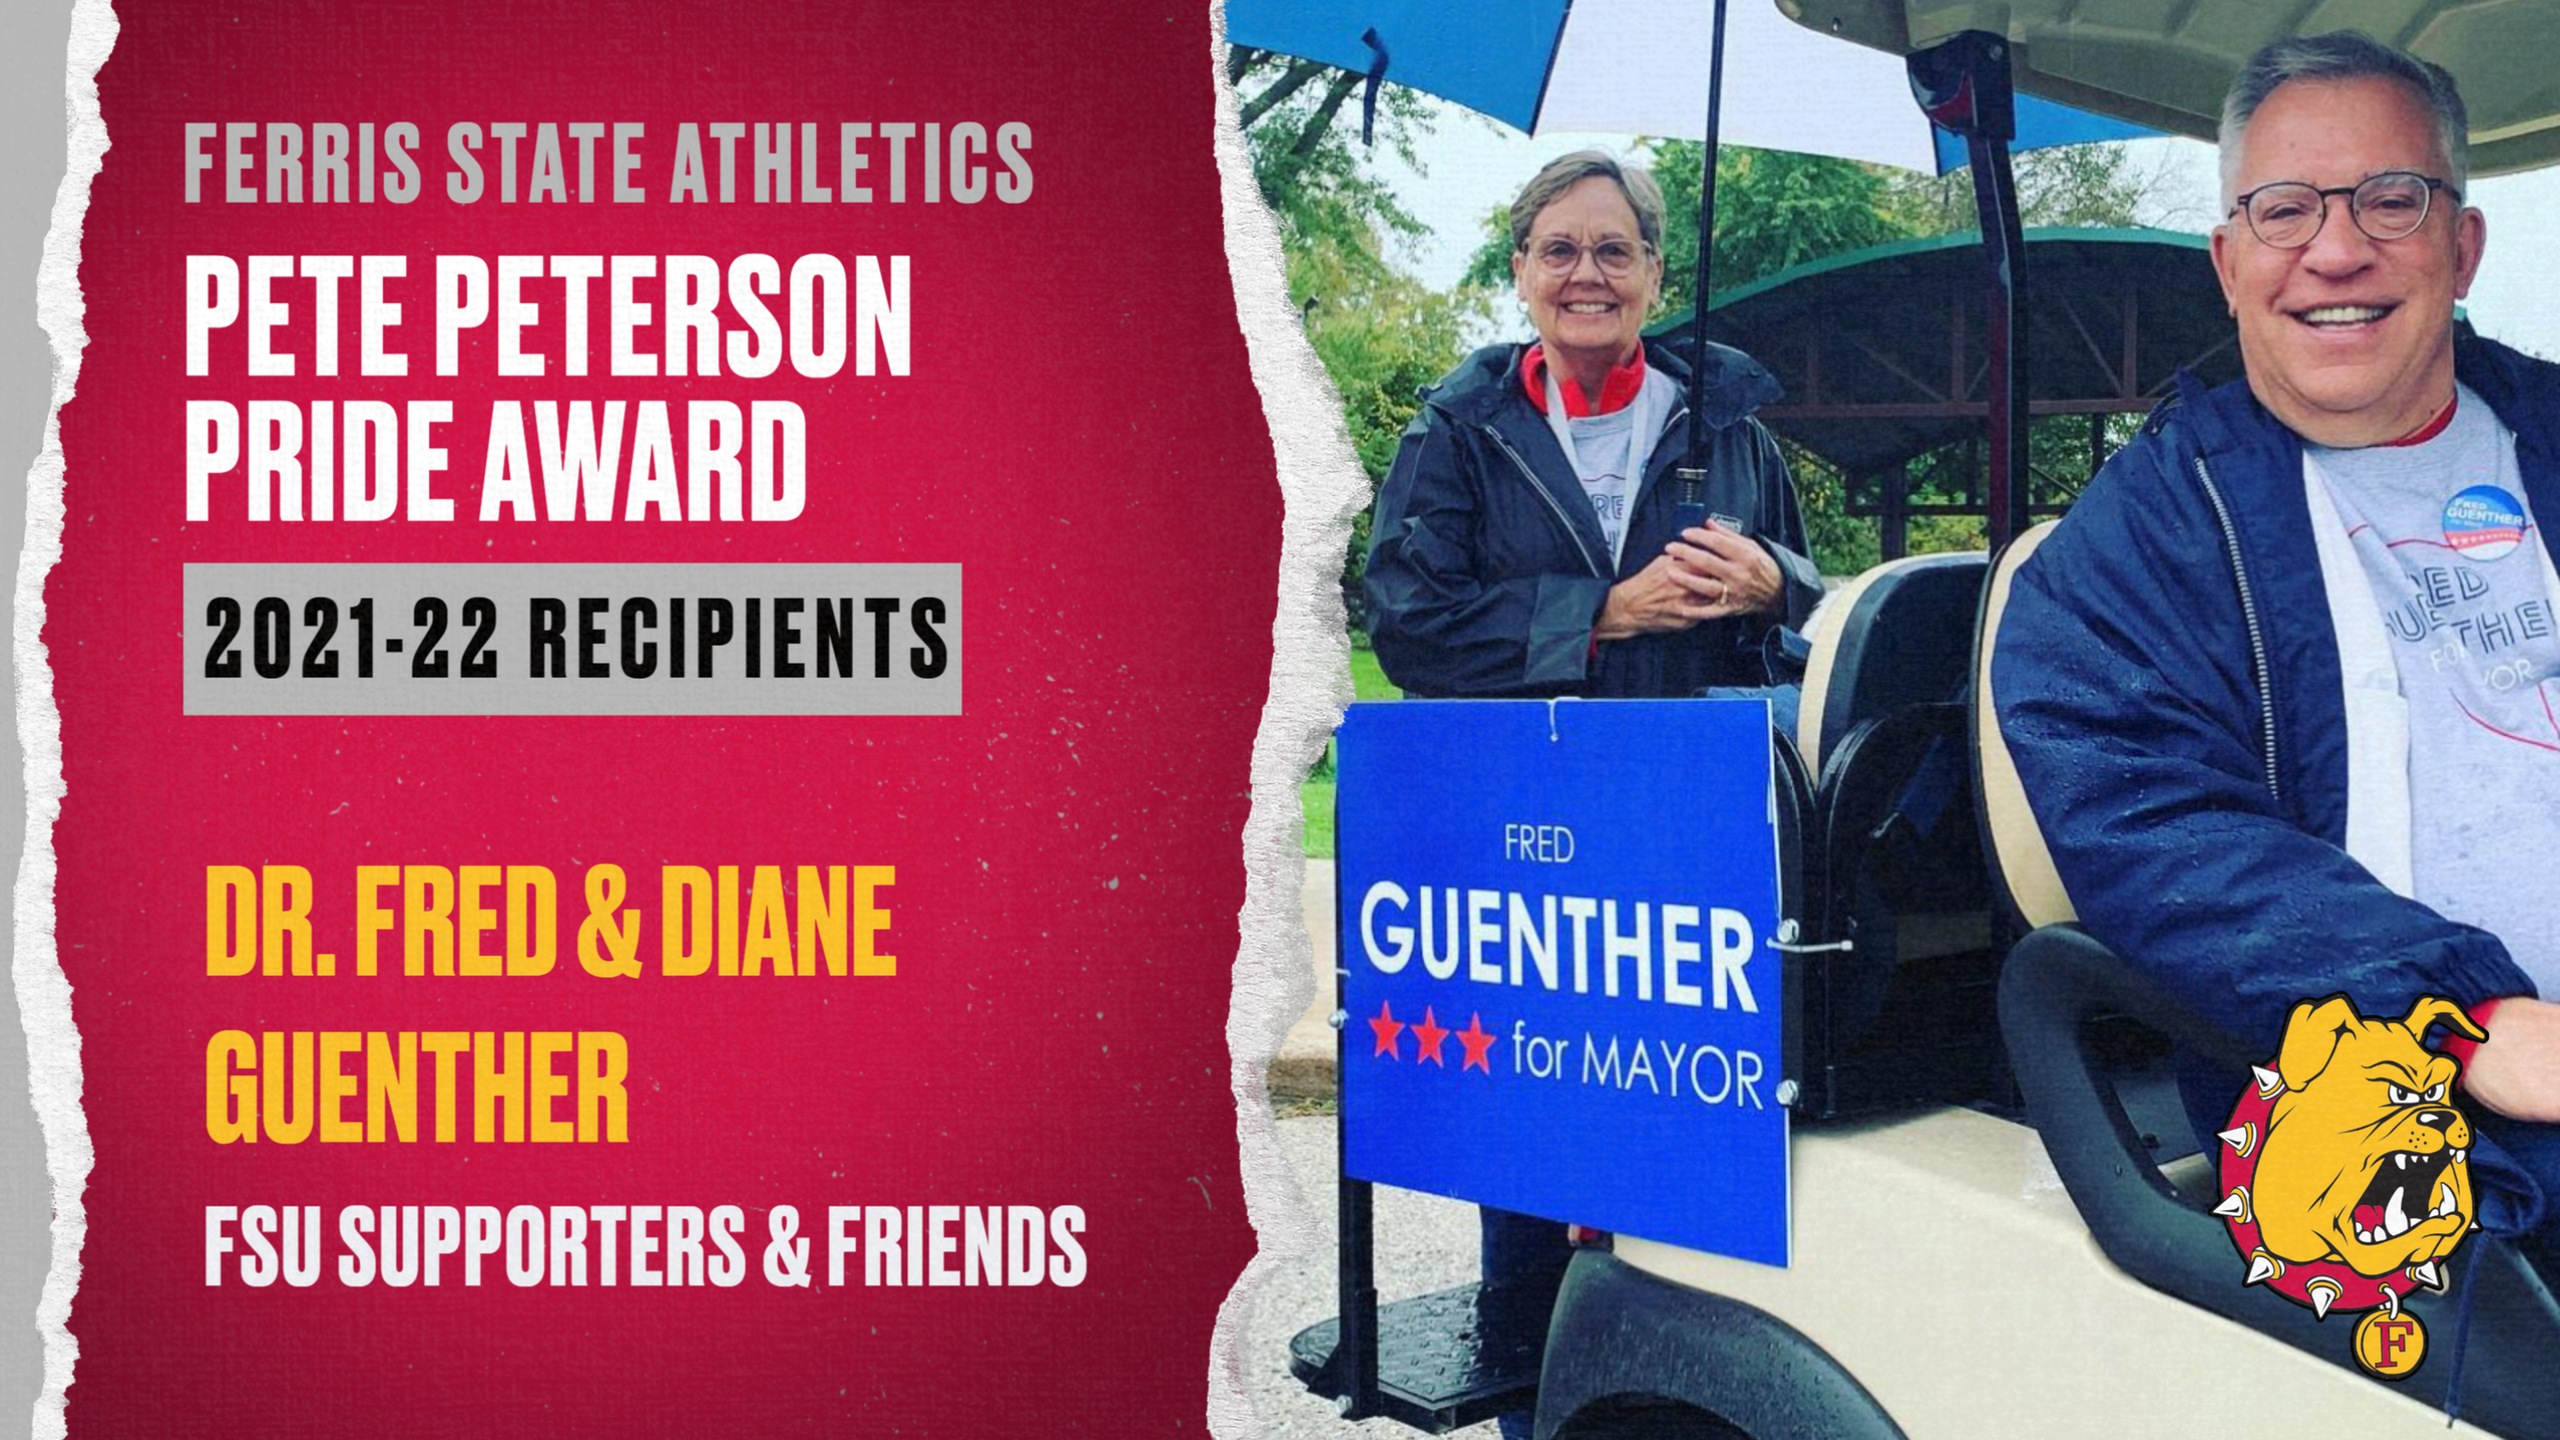 Longtime Supporters Fred & Diane Guenther Honored As Pete Peterson Pride Award Recipients